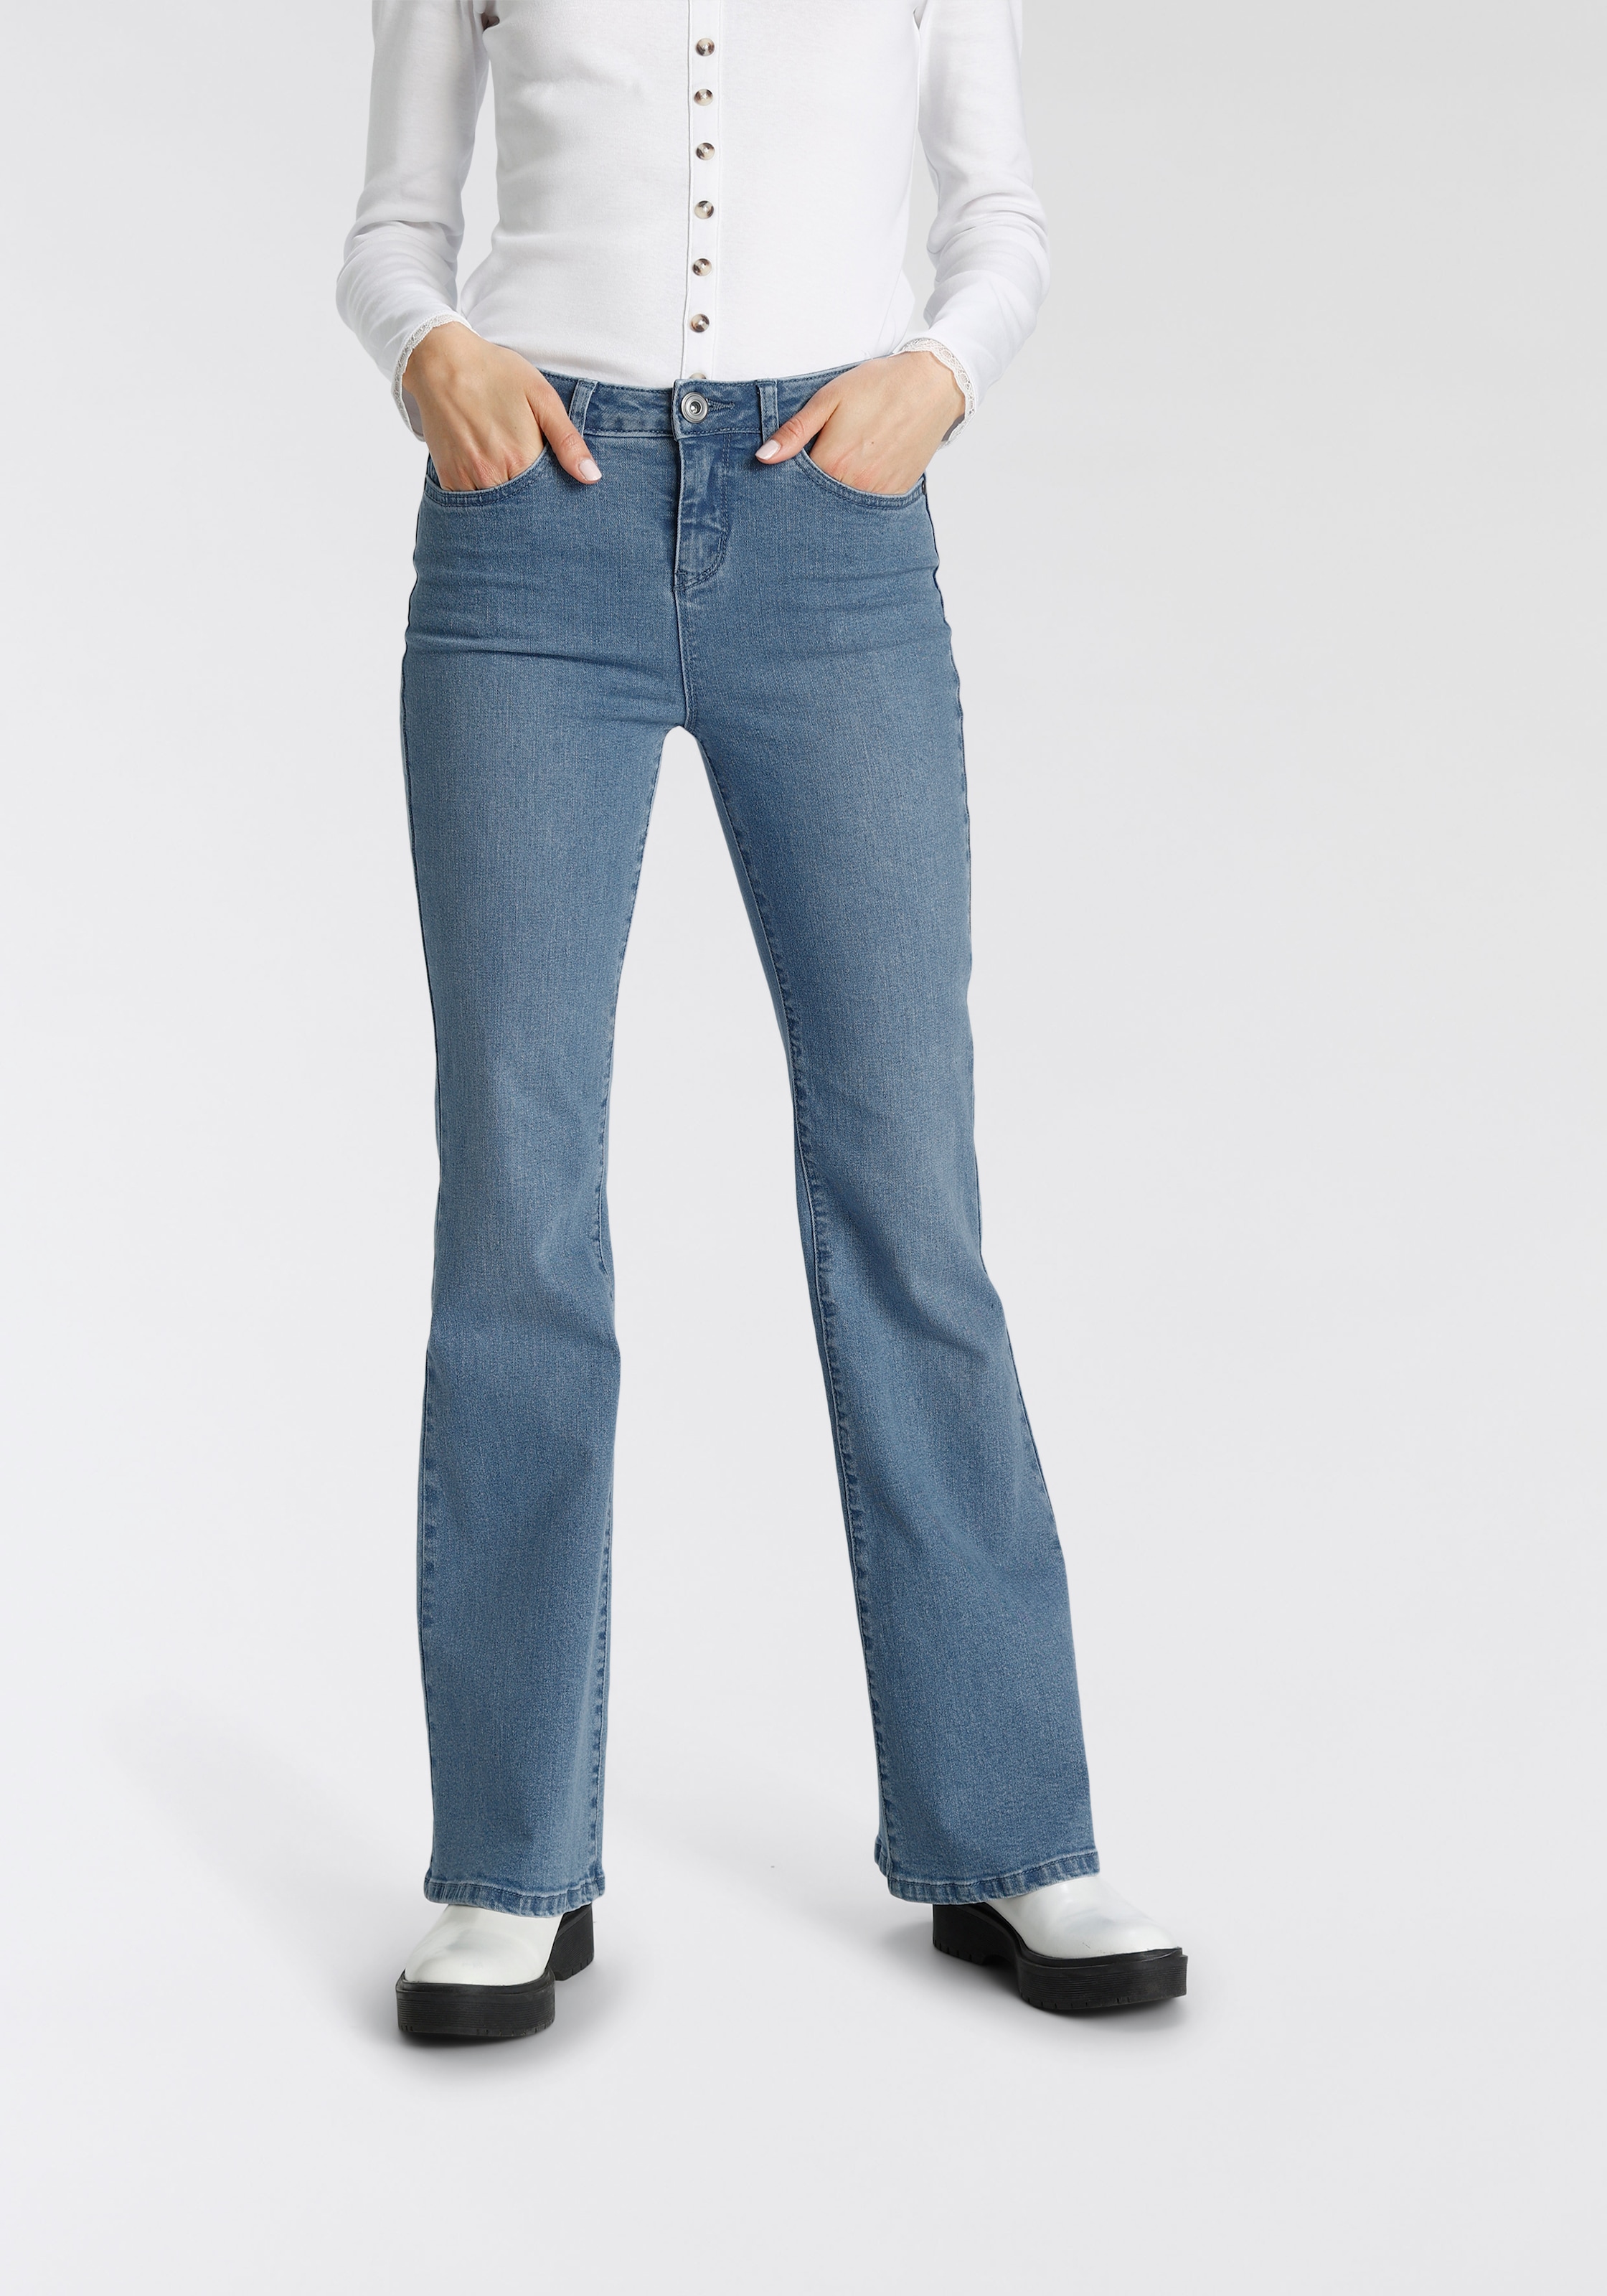 High-waist-Jeans, in Flared Form im 5-Pocket-Style